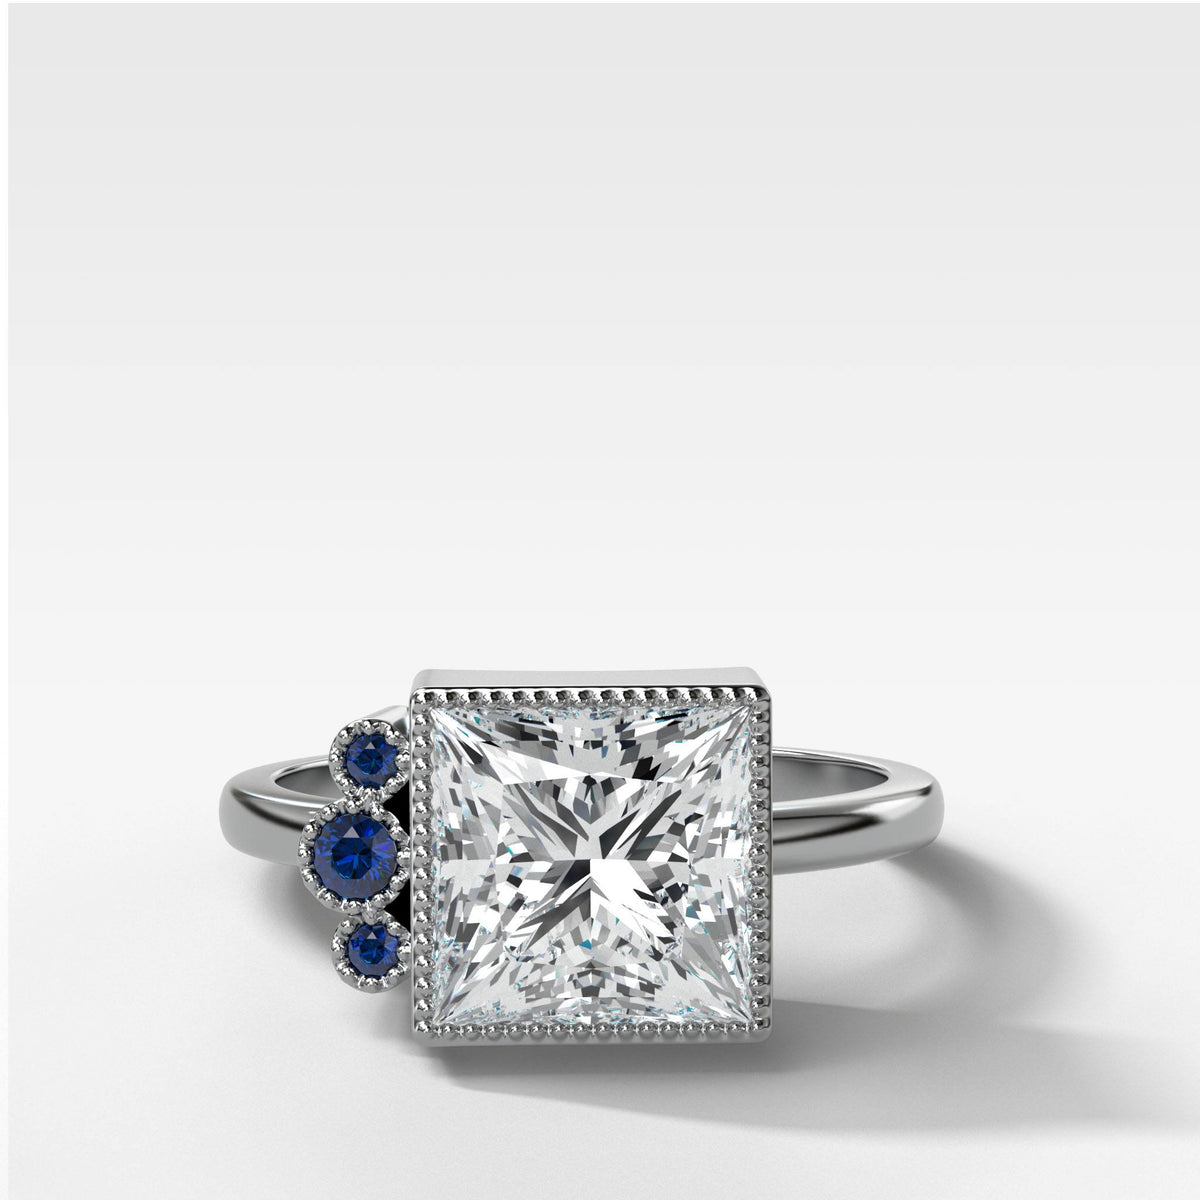 Blue Cluster Engagement Ring With Princess Cut by Good Stone in White Gold